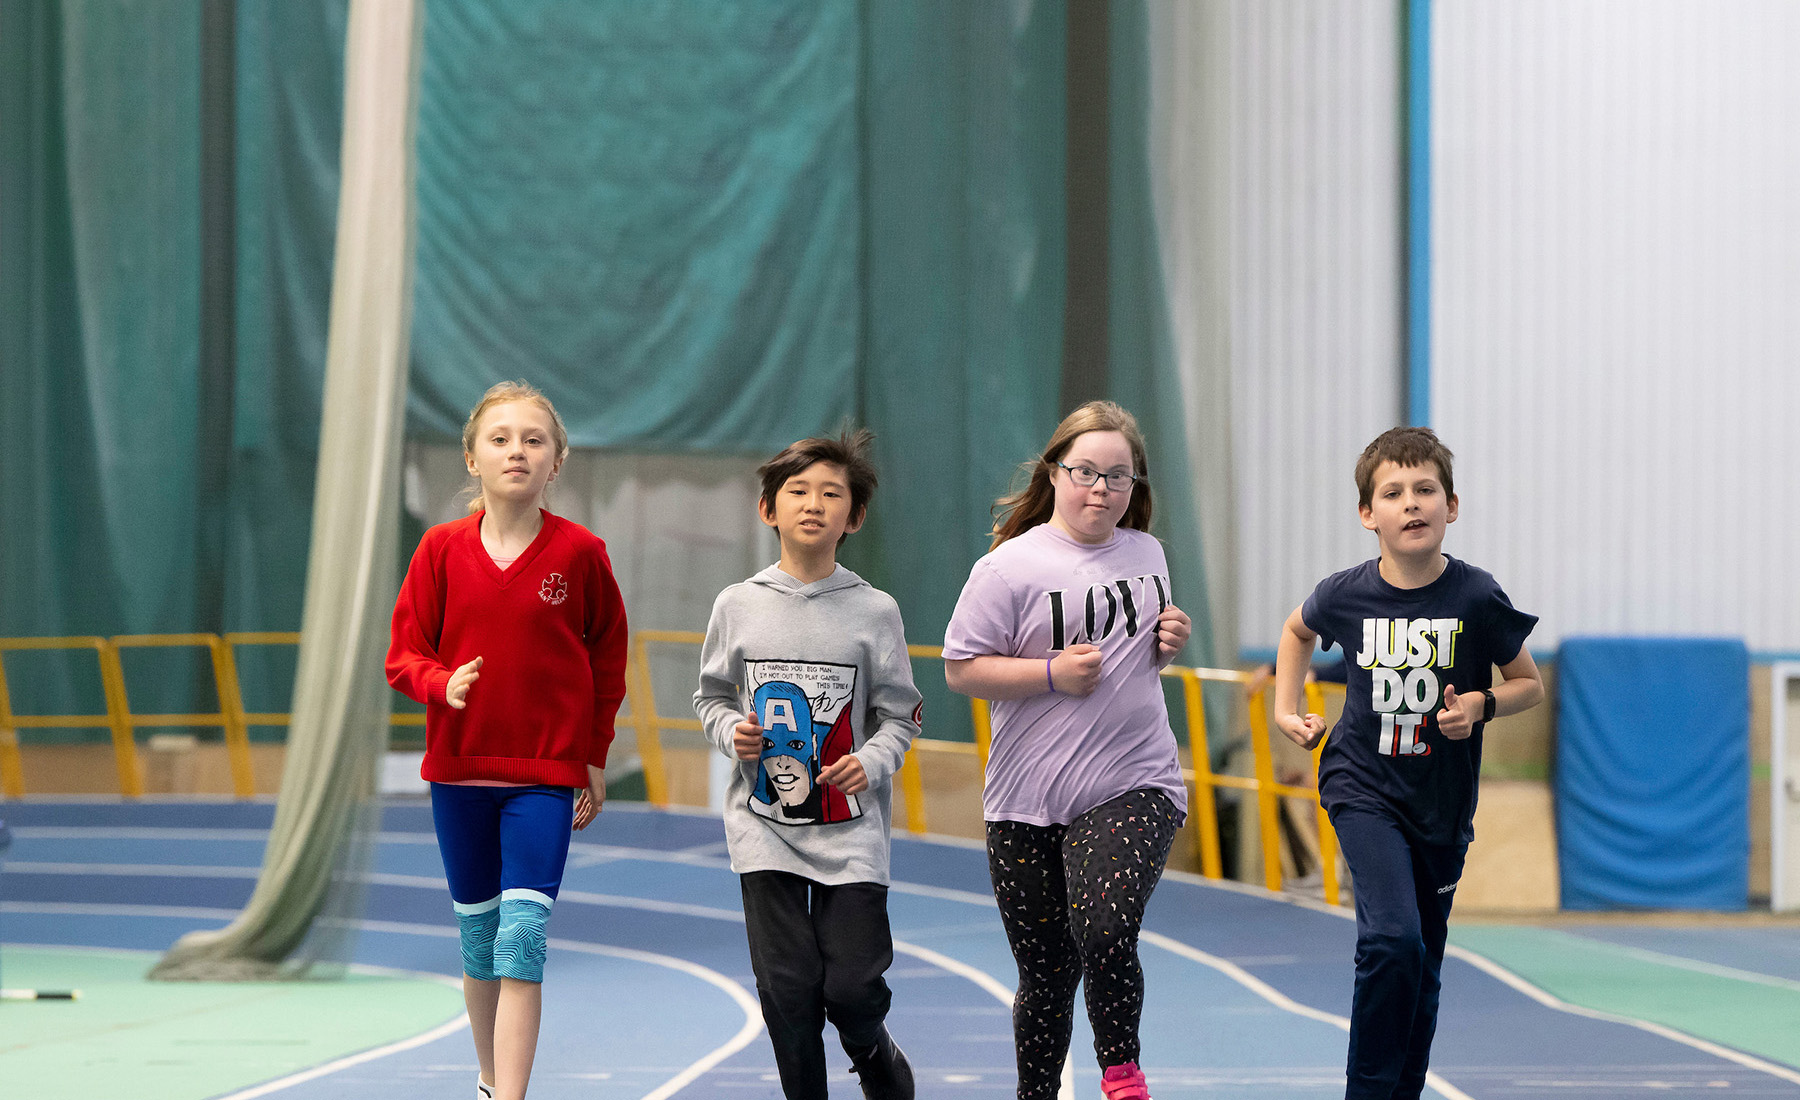 A group of four children run on an indoor race track